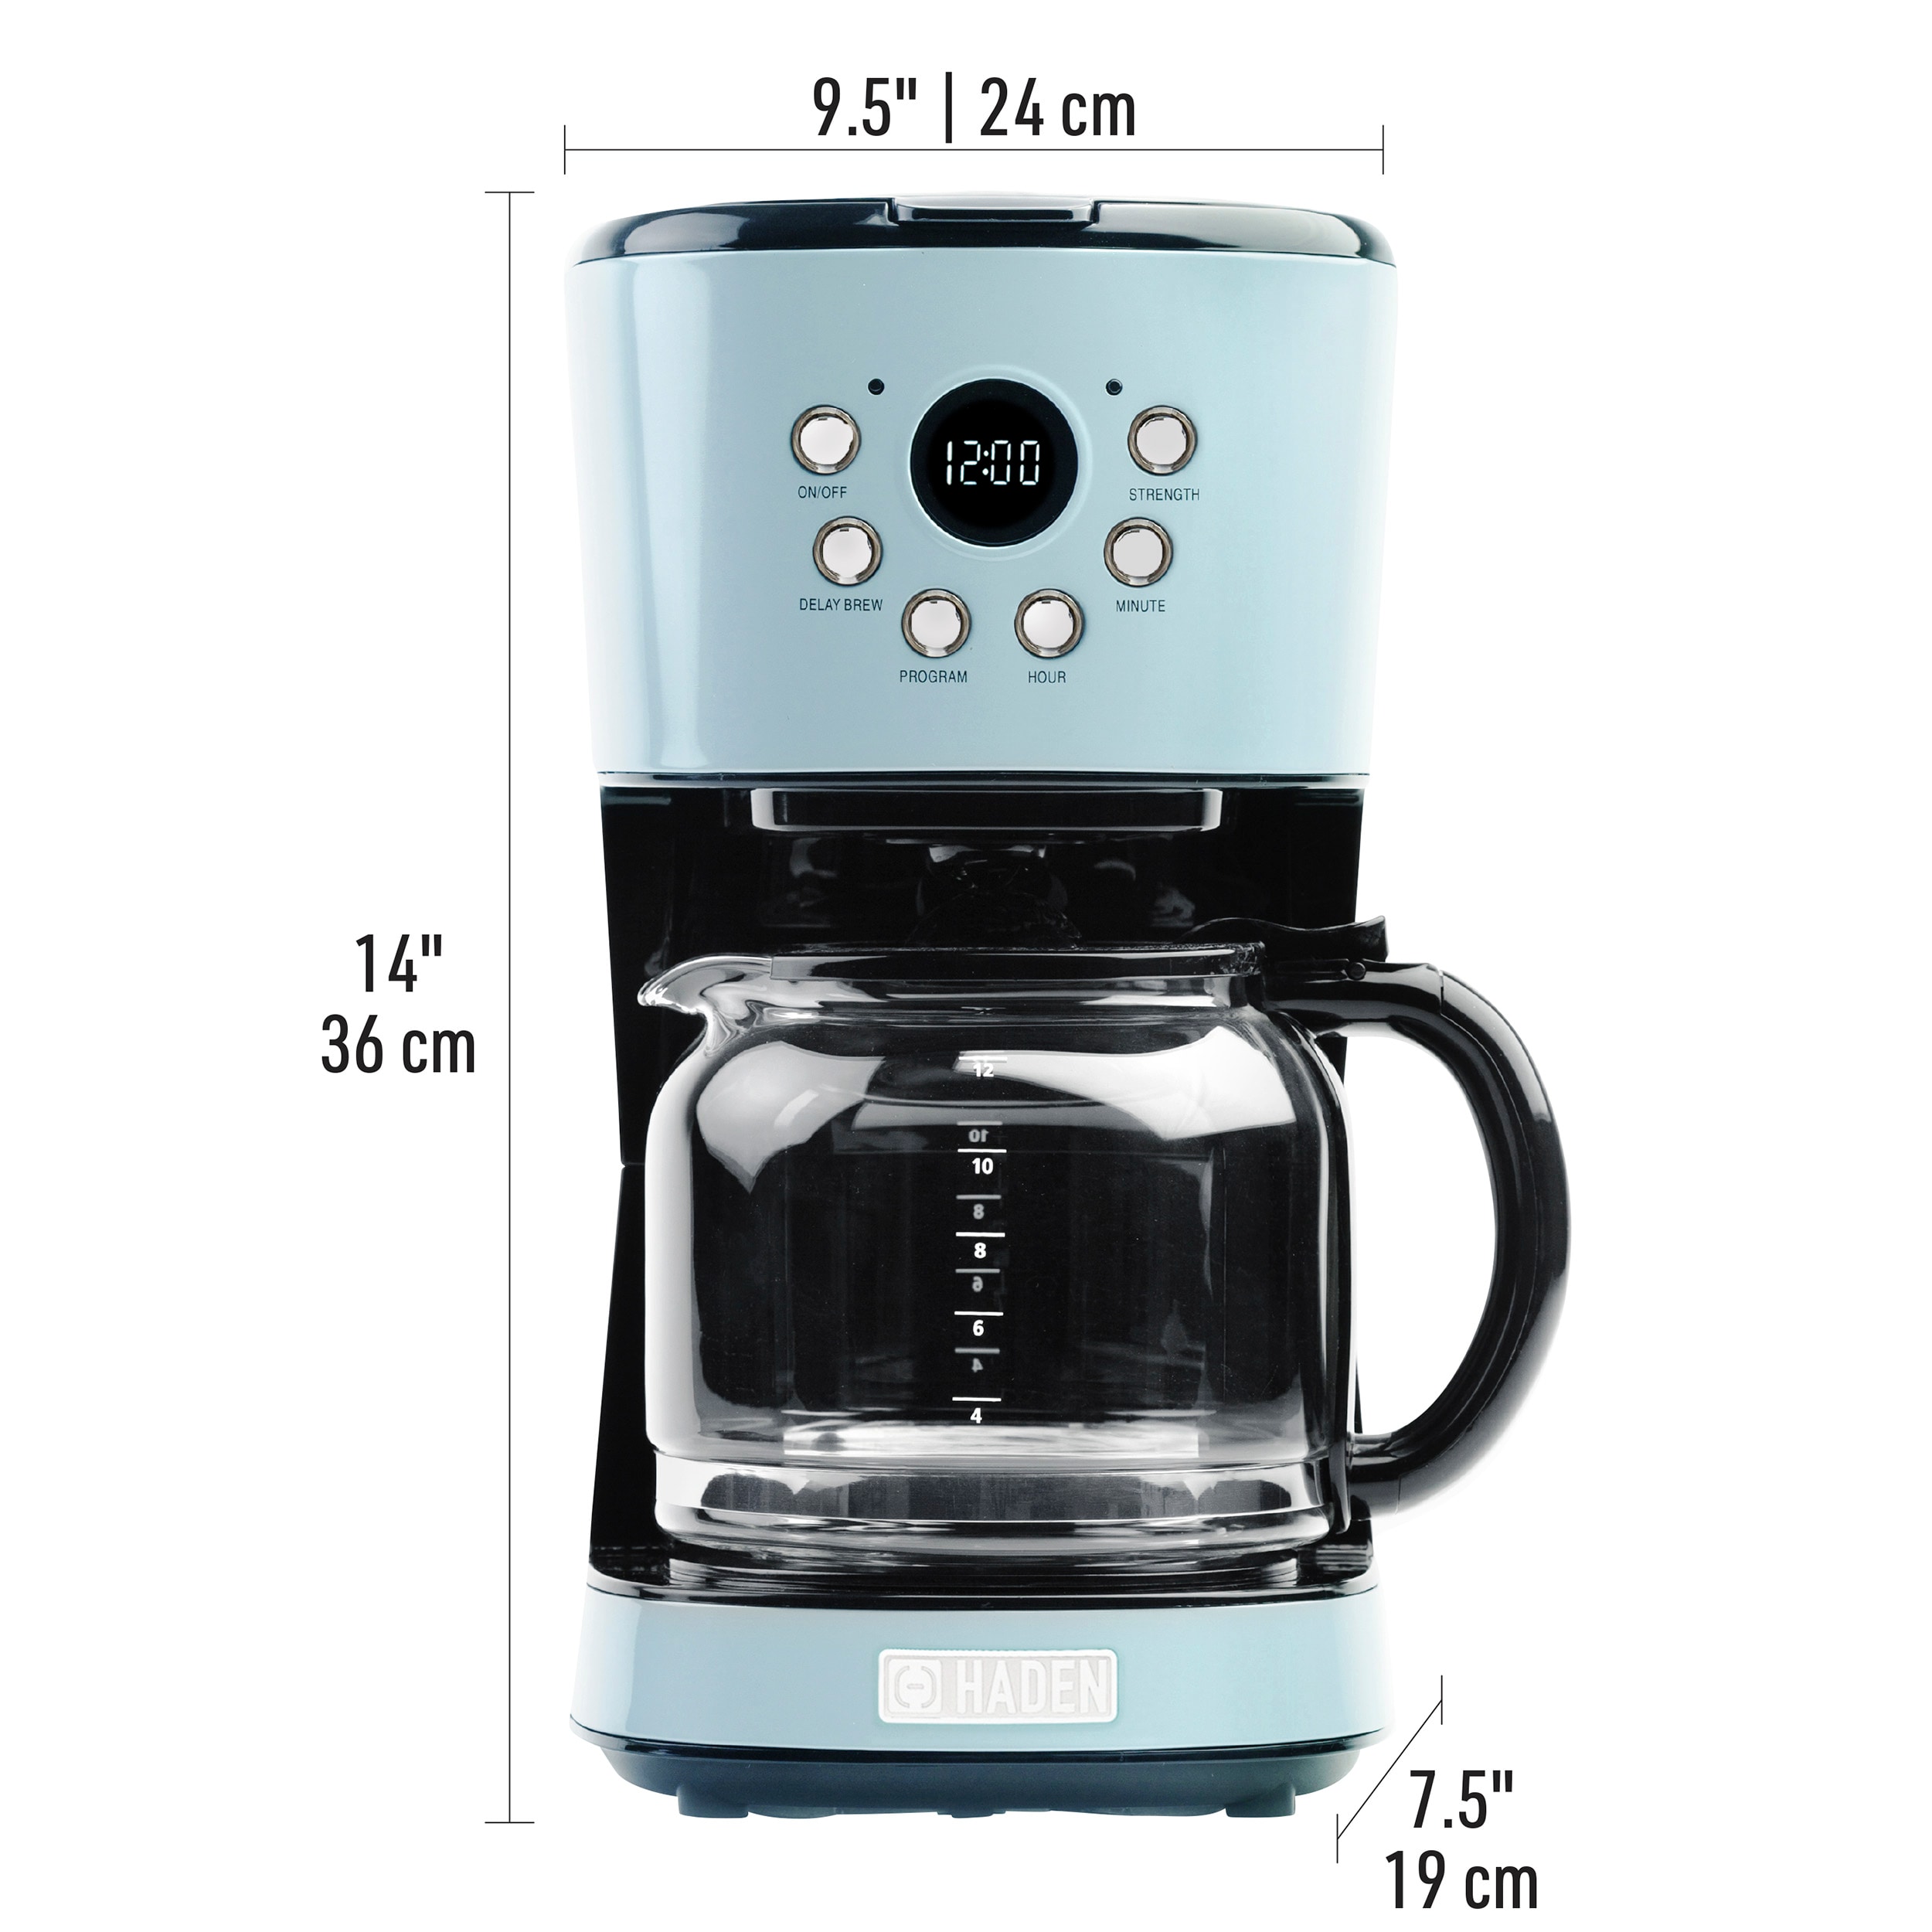 The Mr. Coffee Iced Coffee Maker Is Saving Me $700 a Year